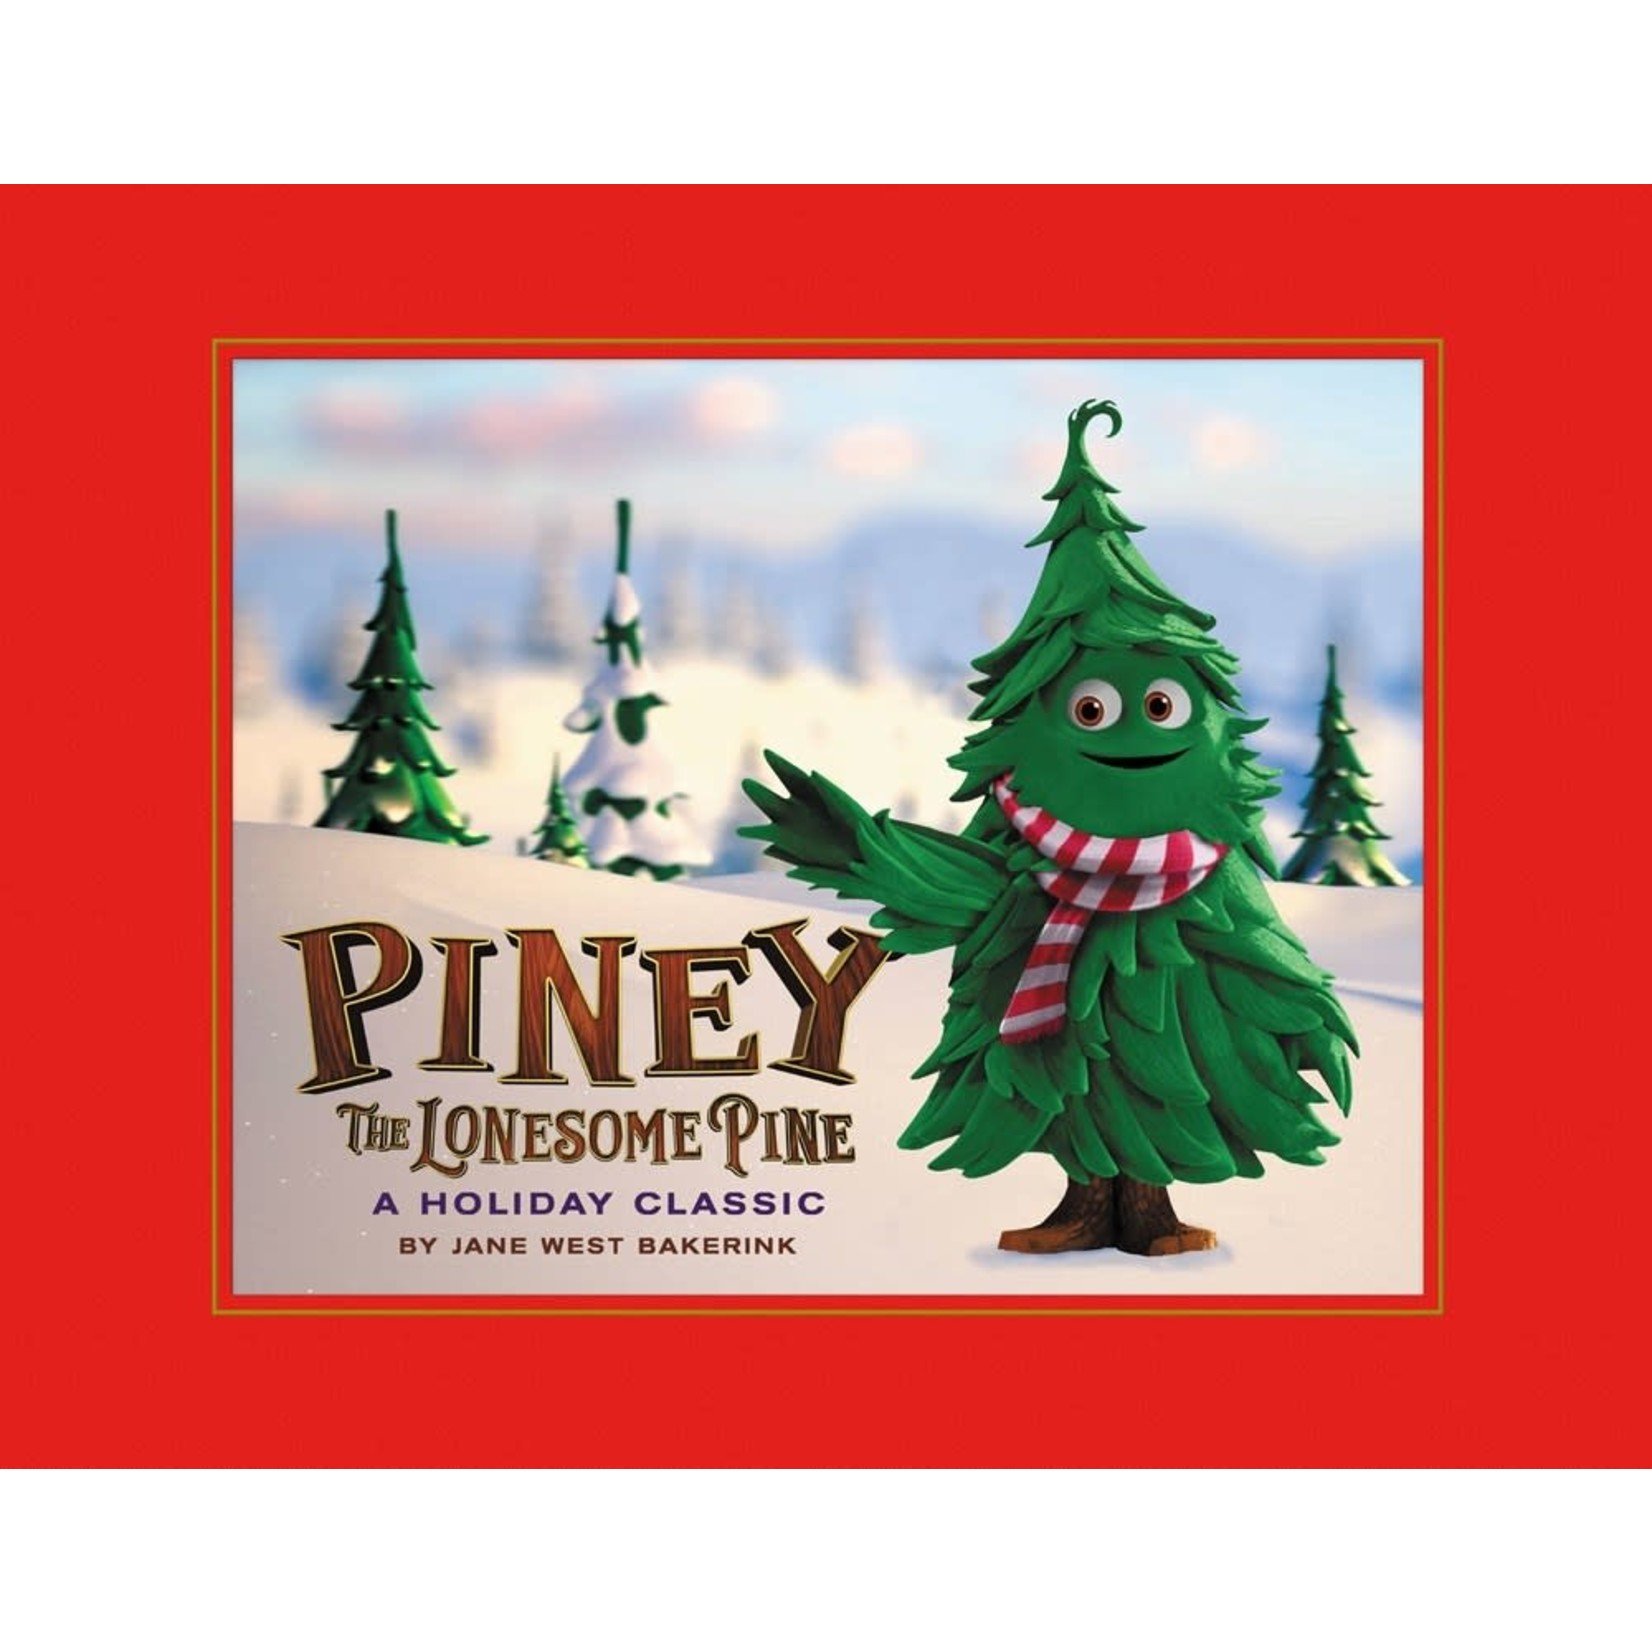 Piney the Lonesome Pine: A Holiday Classic